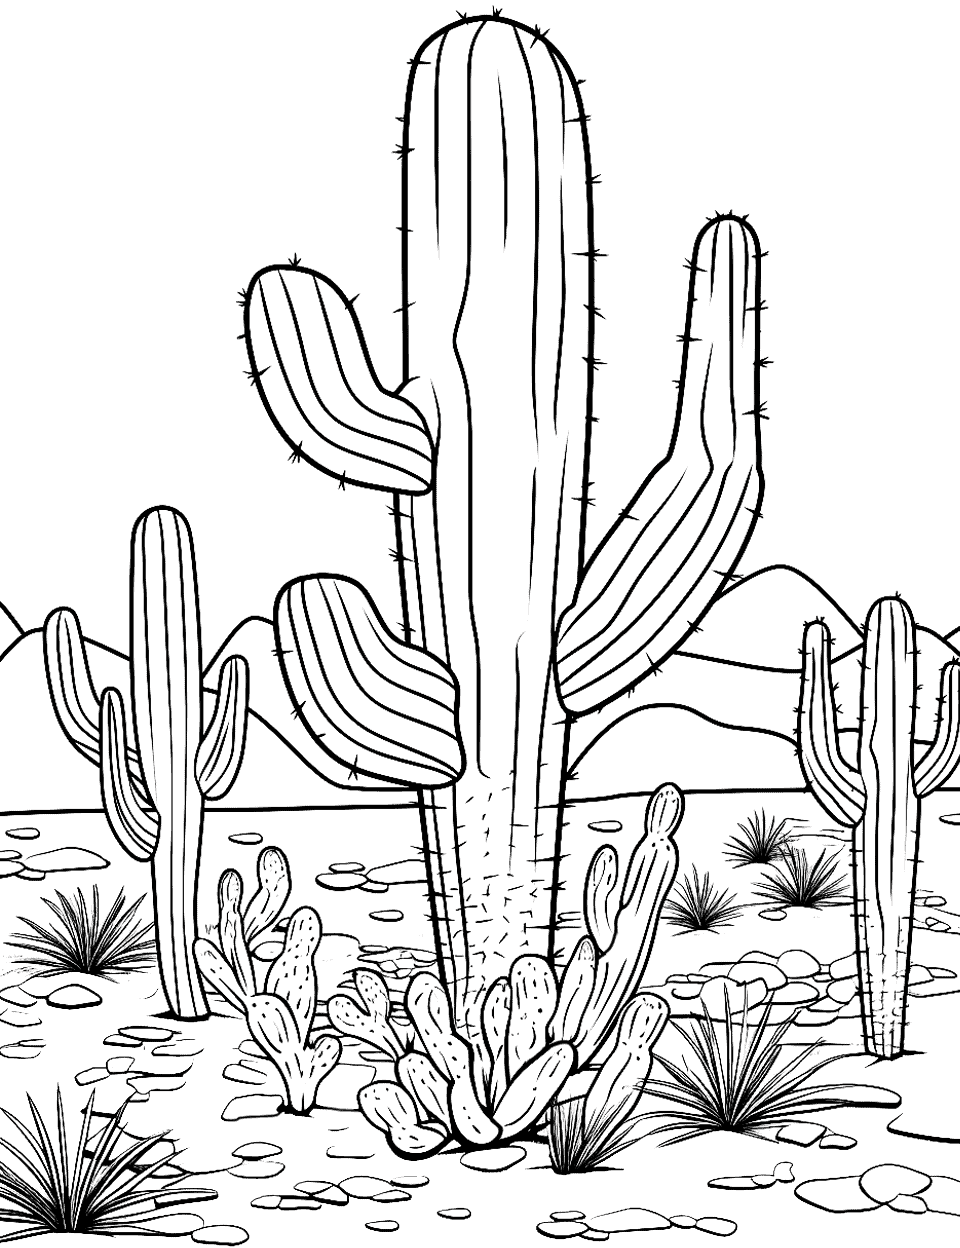 Sonoran Desert Landscape Cactus Coloring Page - A landscape scene of the Sonoran Desert featuring various types of cacti and desert plants.